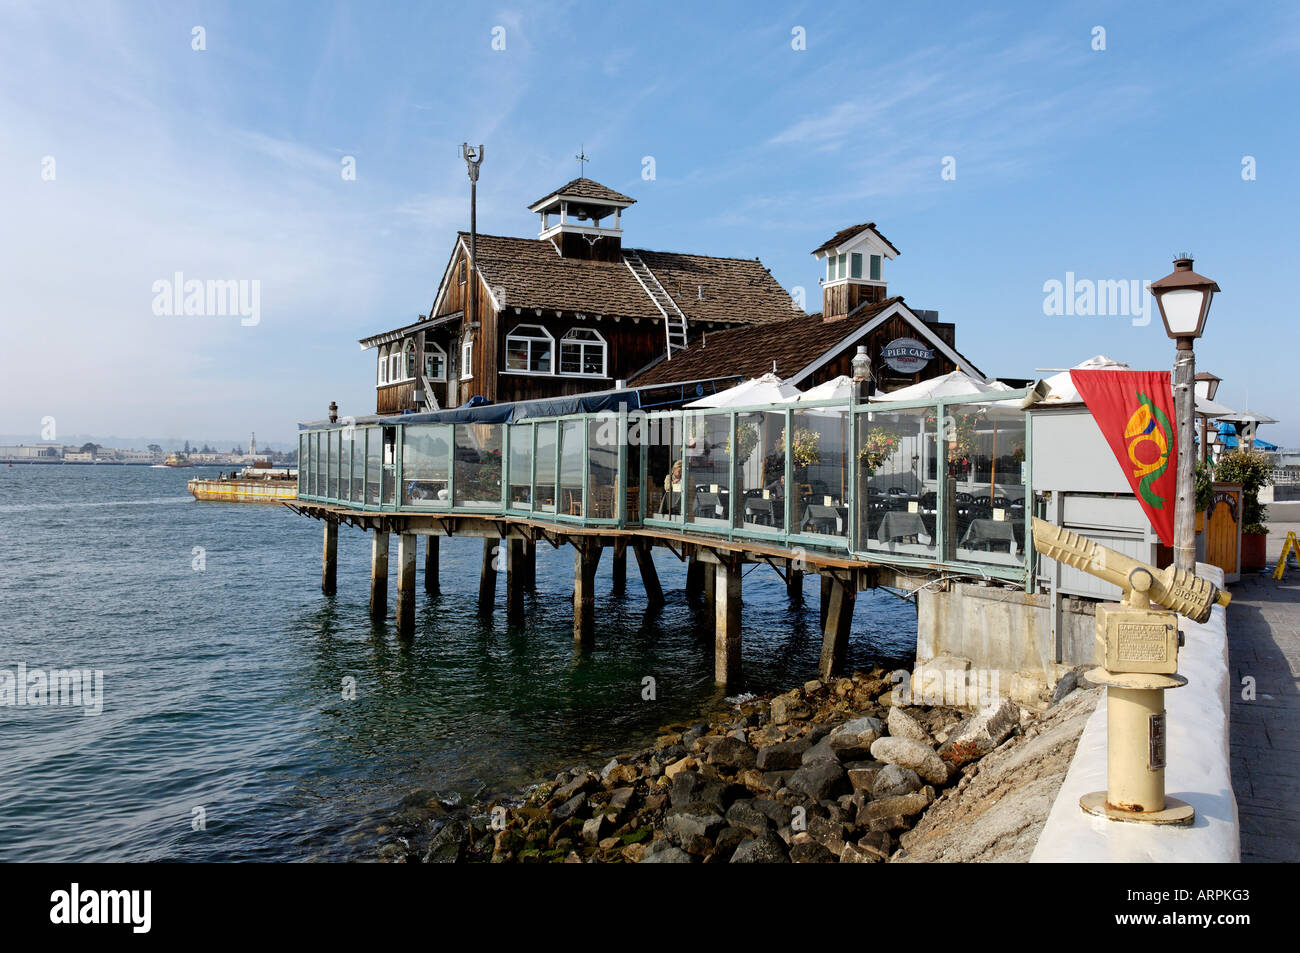 A Landscape Photograph of a Restaurant at the End of a Pier in Seaport Village in San Diego, California Stock Photo